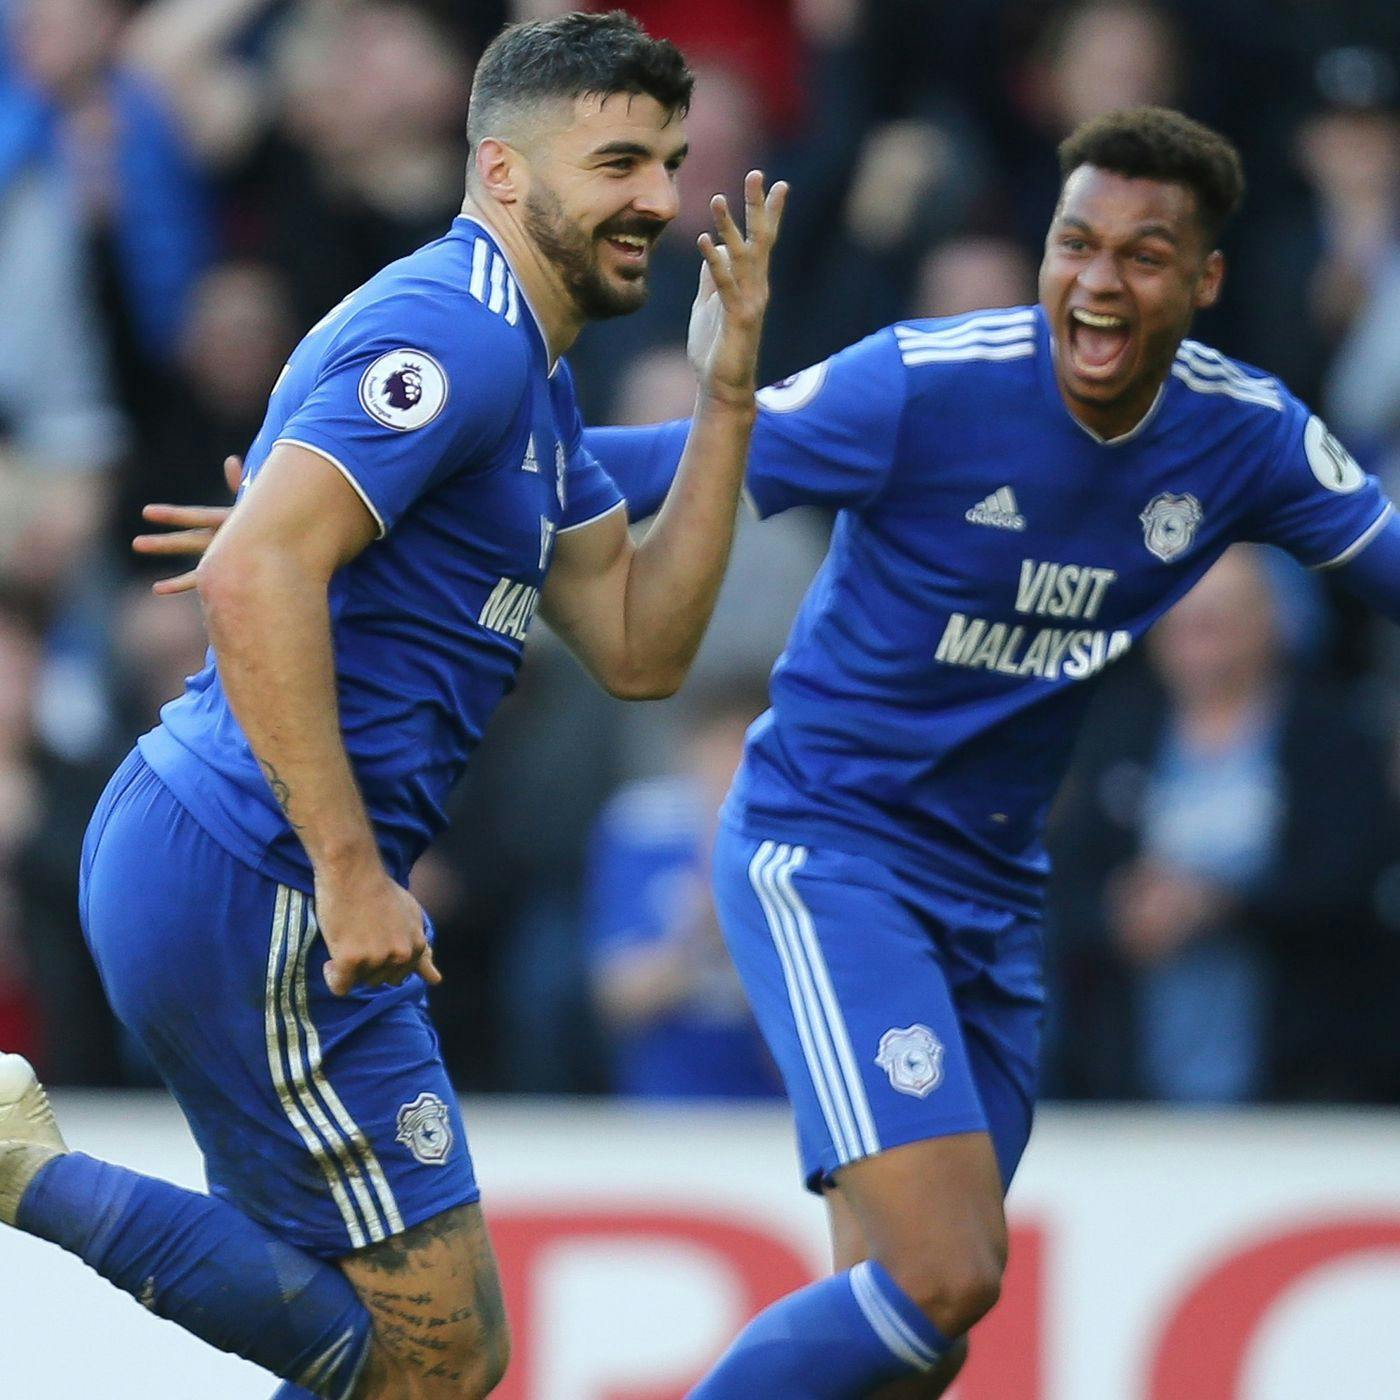 ’Cardiff’s attack bossed Fulham but Paterson is a stop-gap’